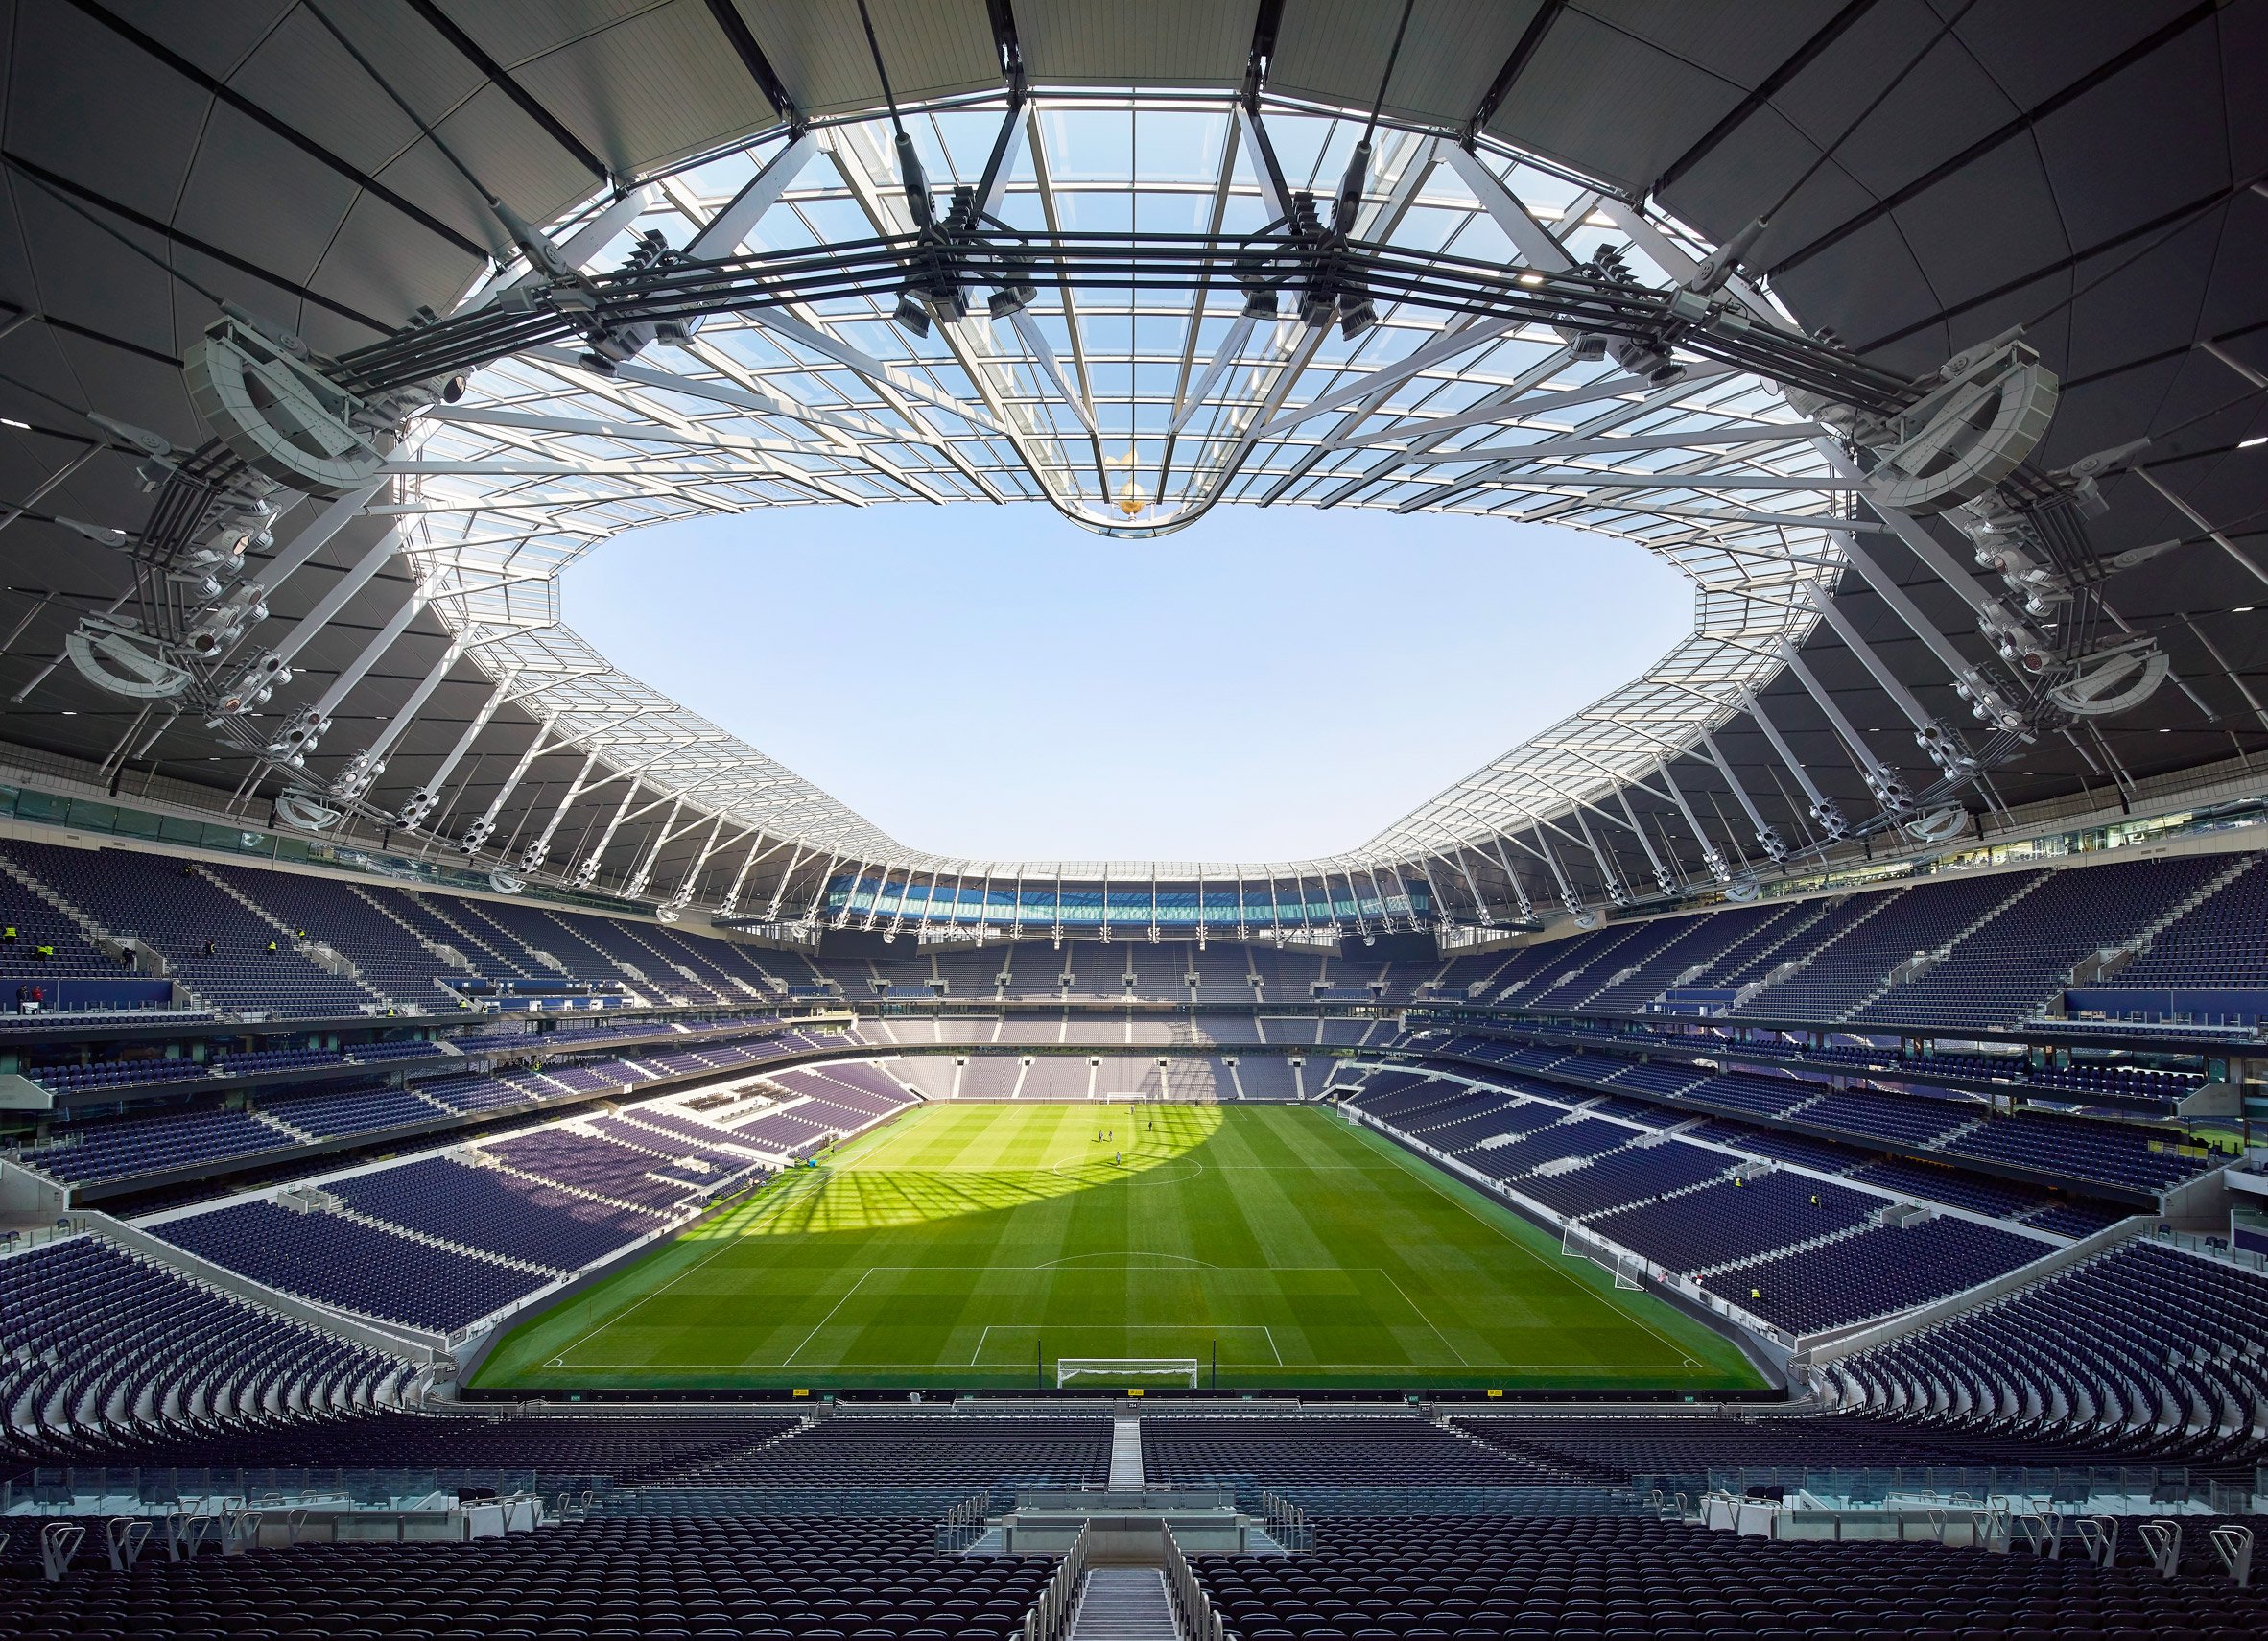  An empty Tottenham Hotspur stadium with a closed roof.